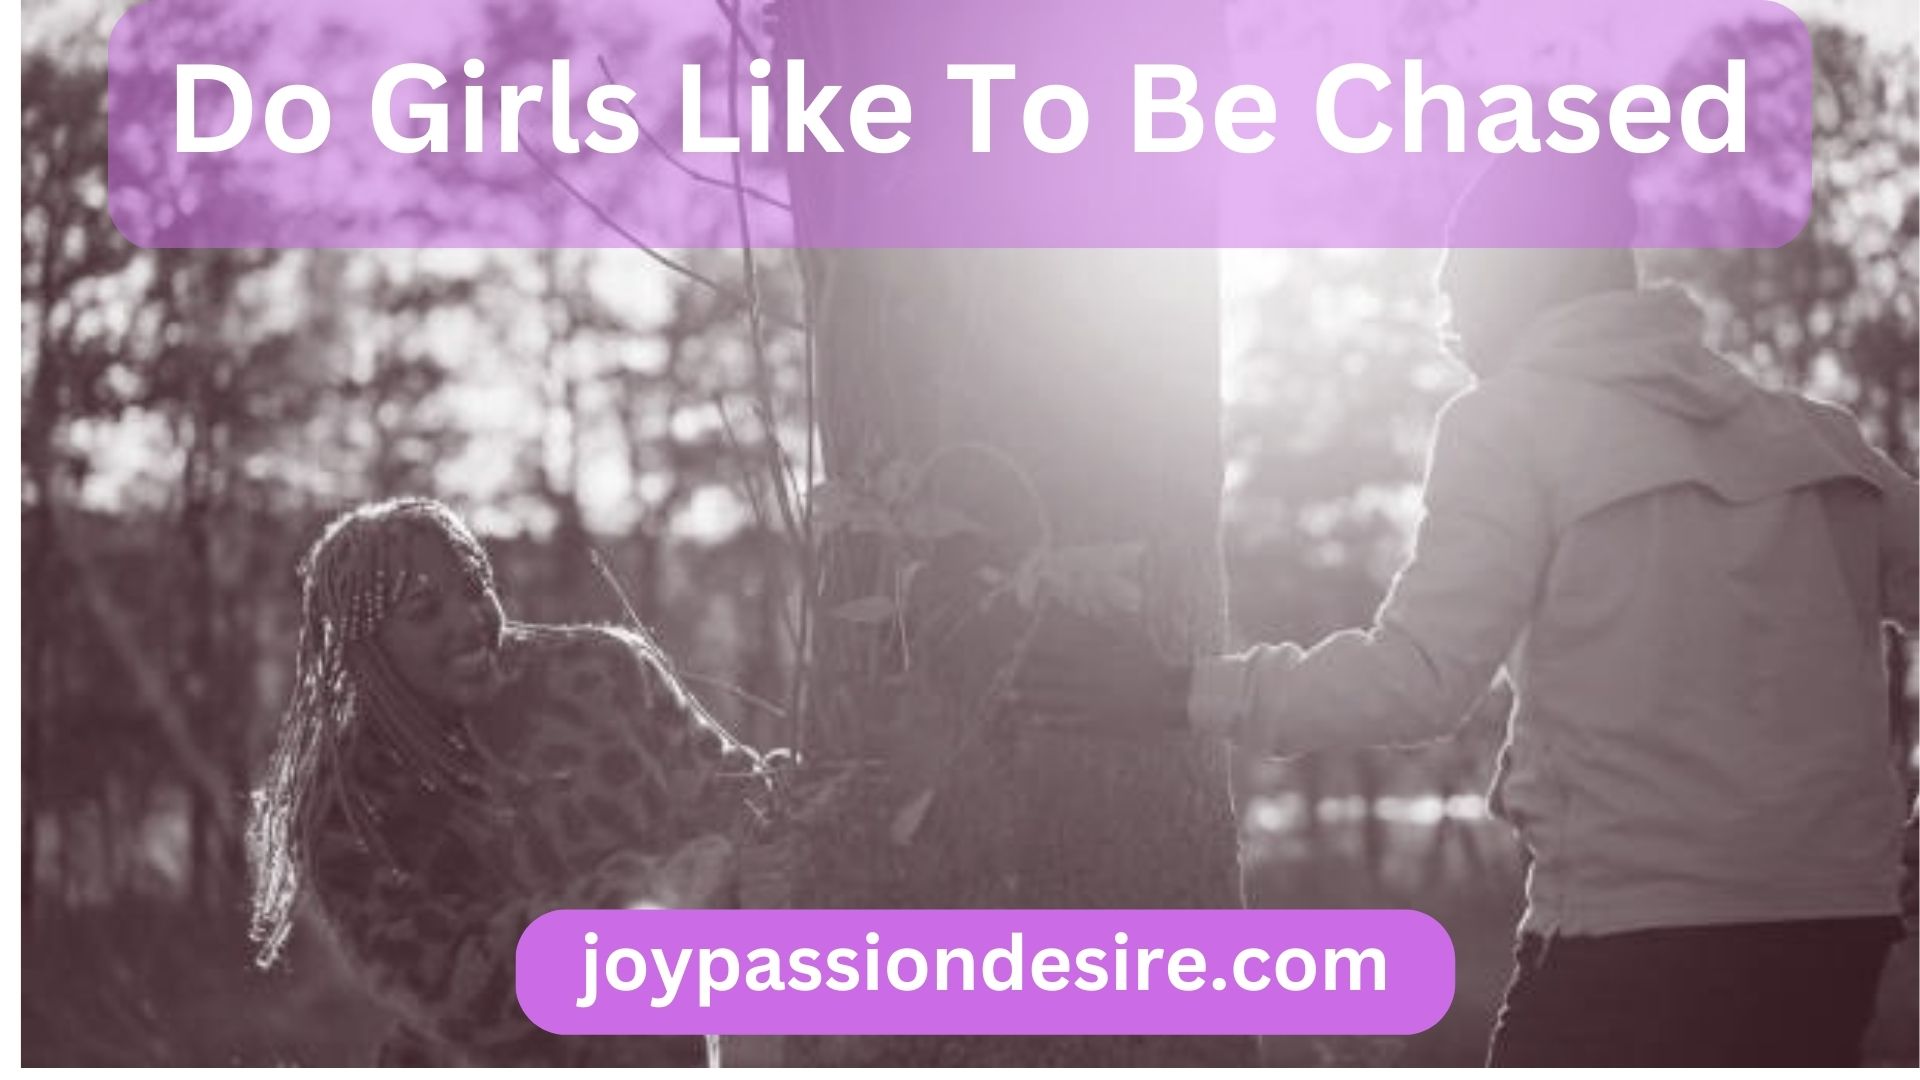 Do Girls Like To Be Chased